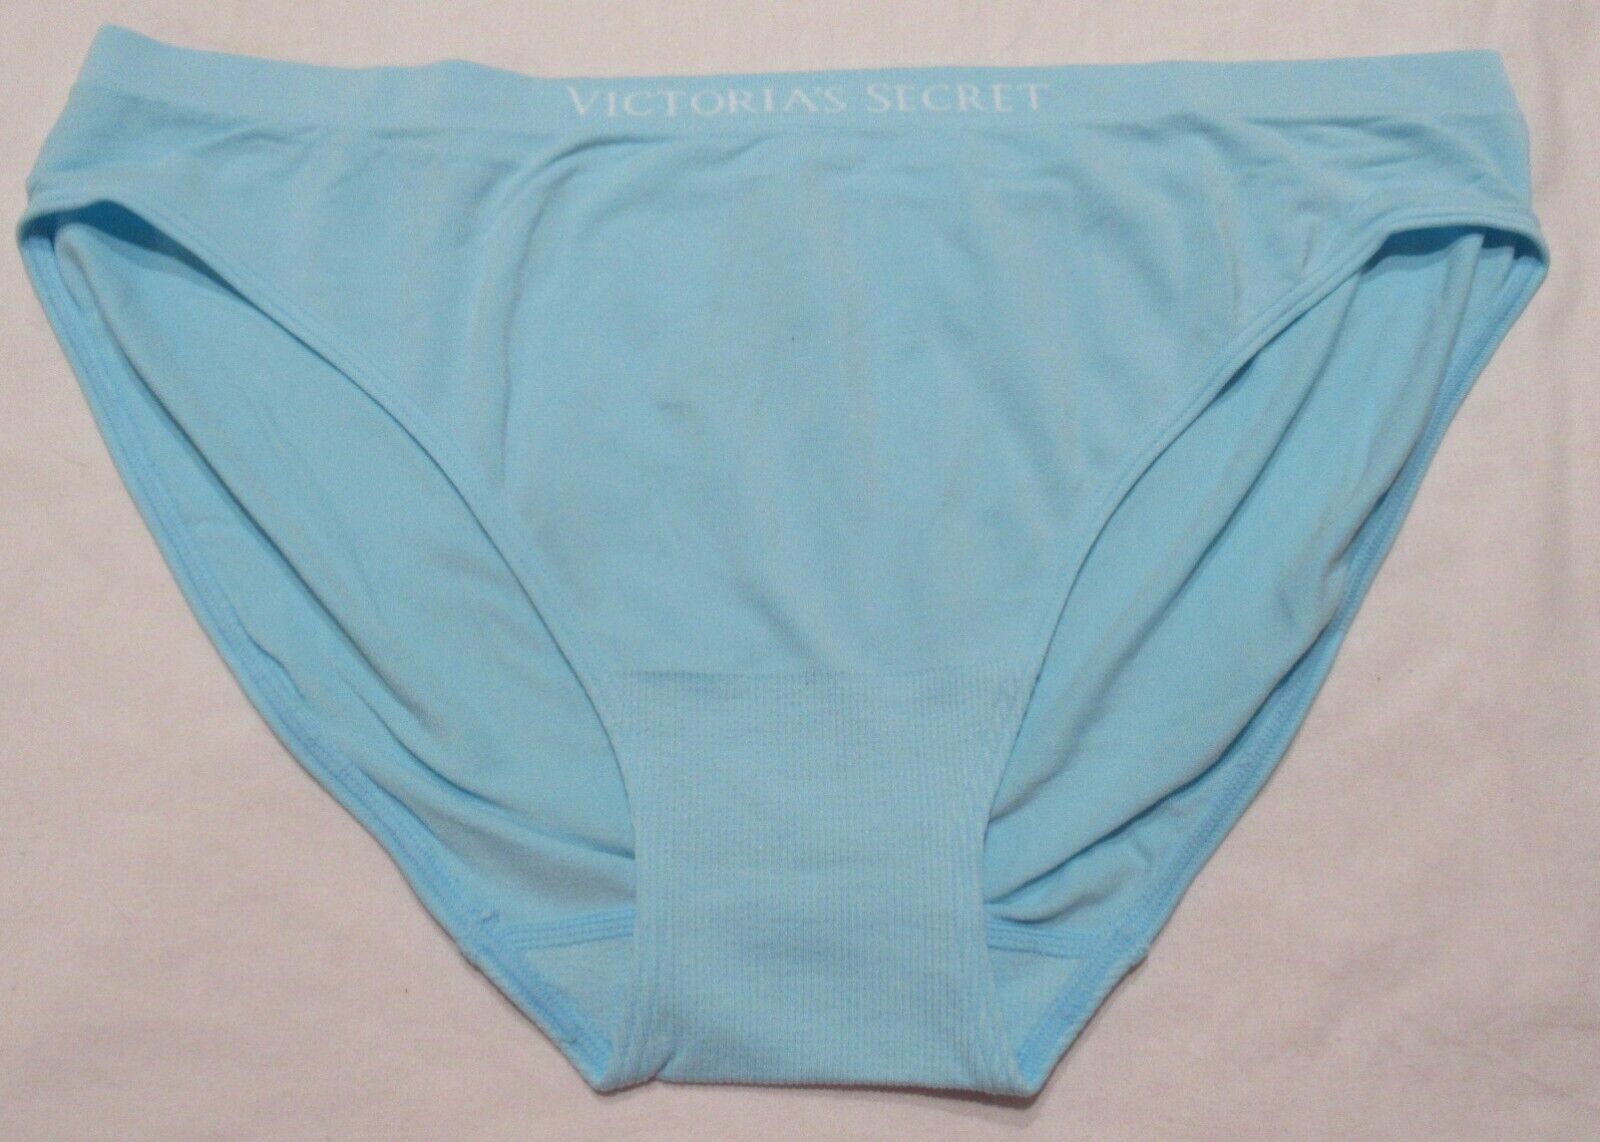 Victoria's Secret Panty Underwear Seamless and 50 similar items